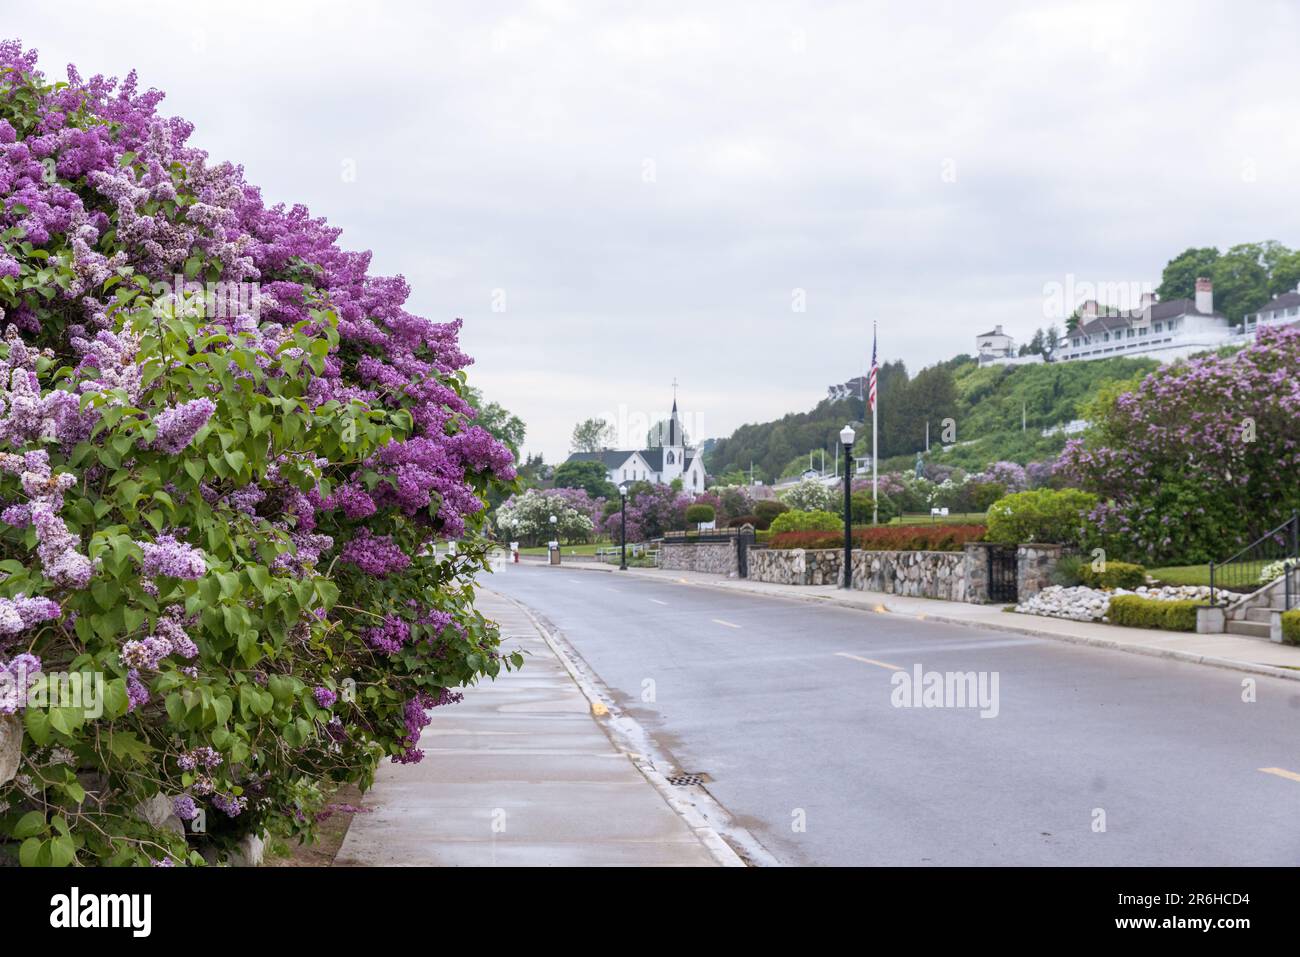 Surnise over lilacs blooming in front of Marquette Park on Mackinac Island Stock Photo